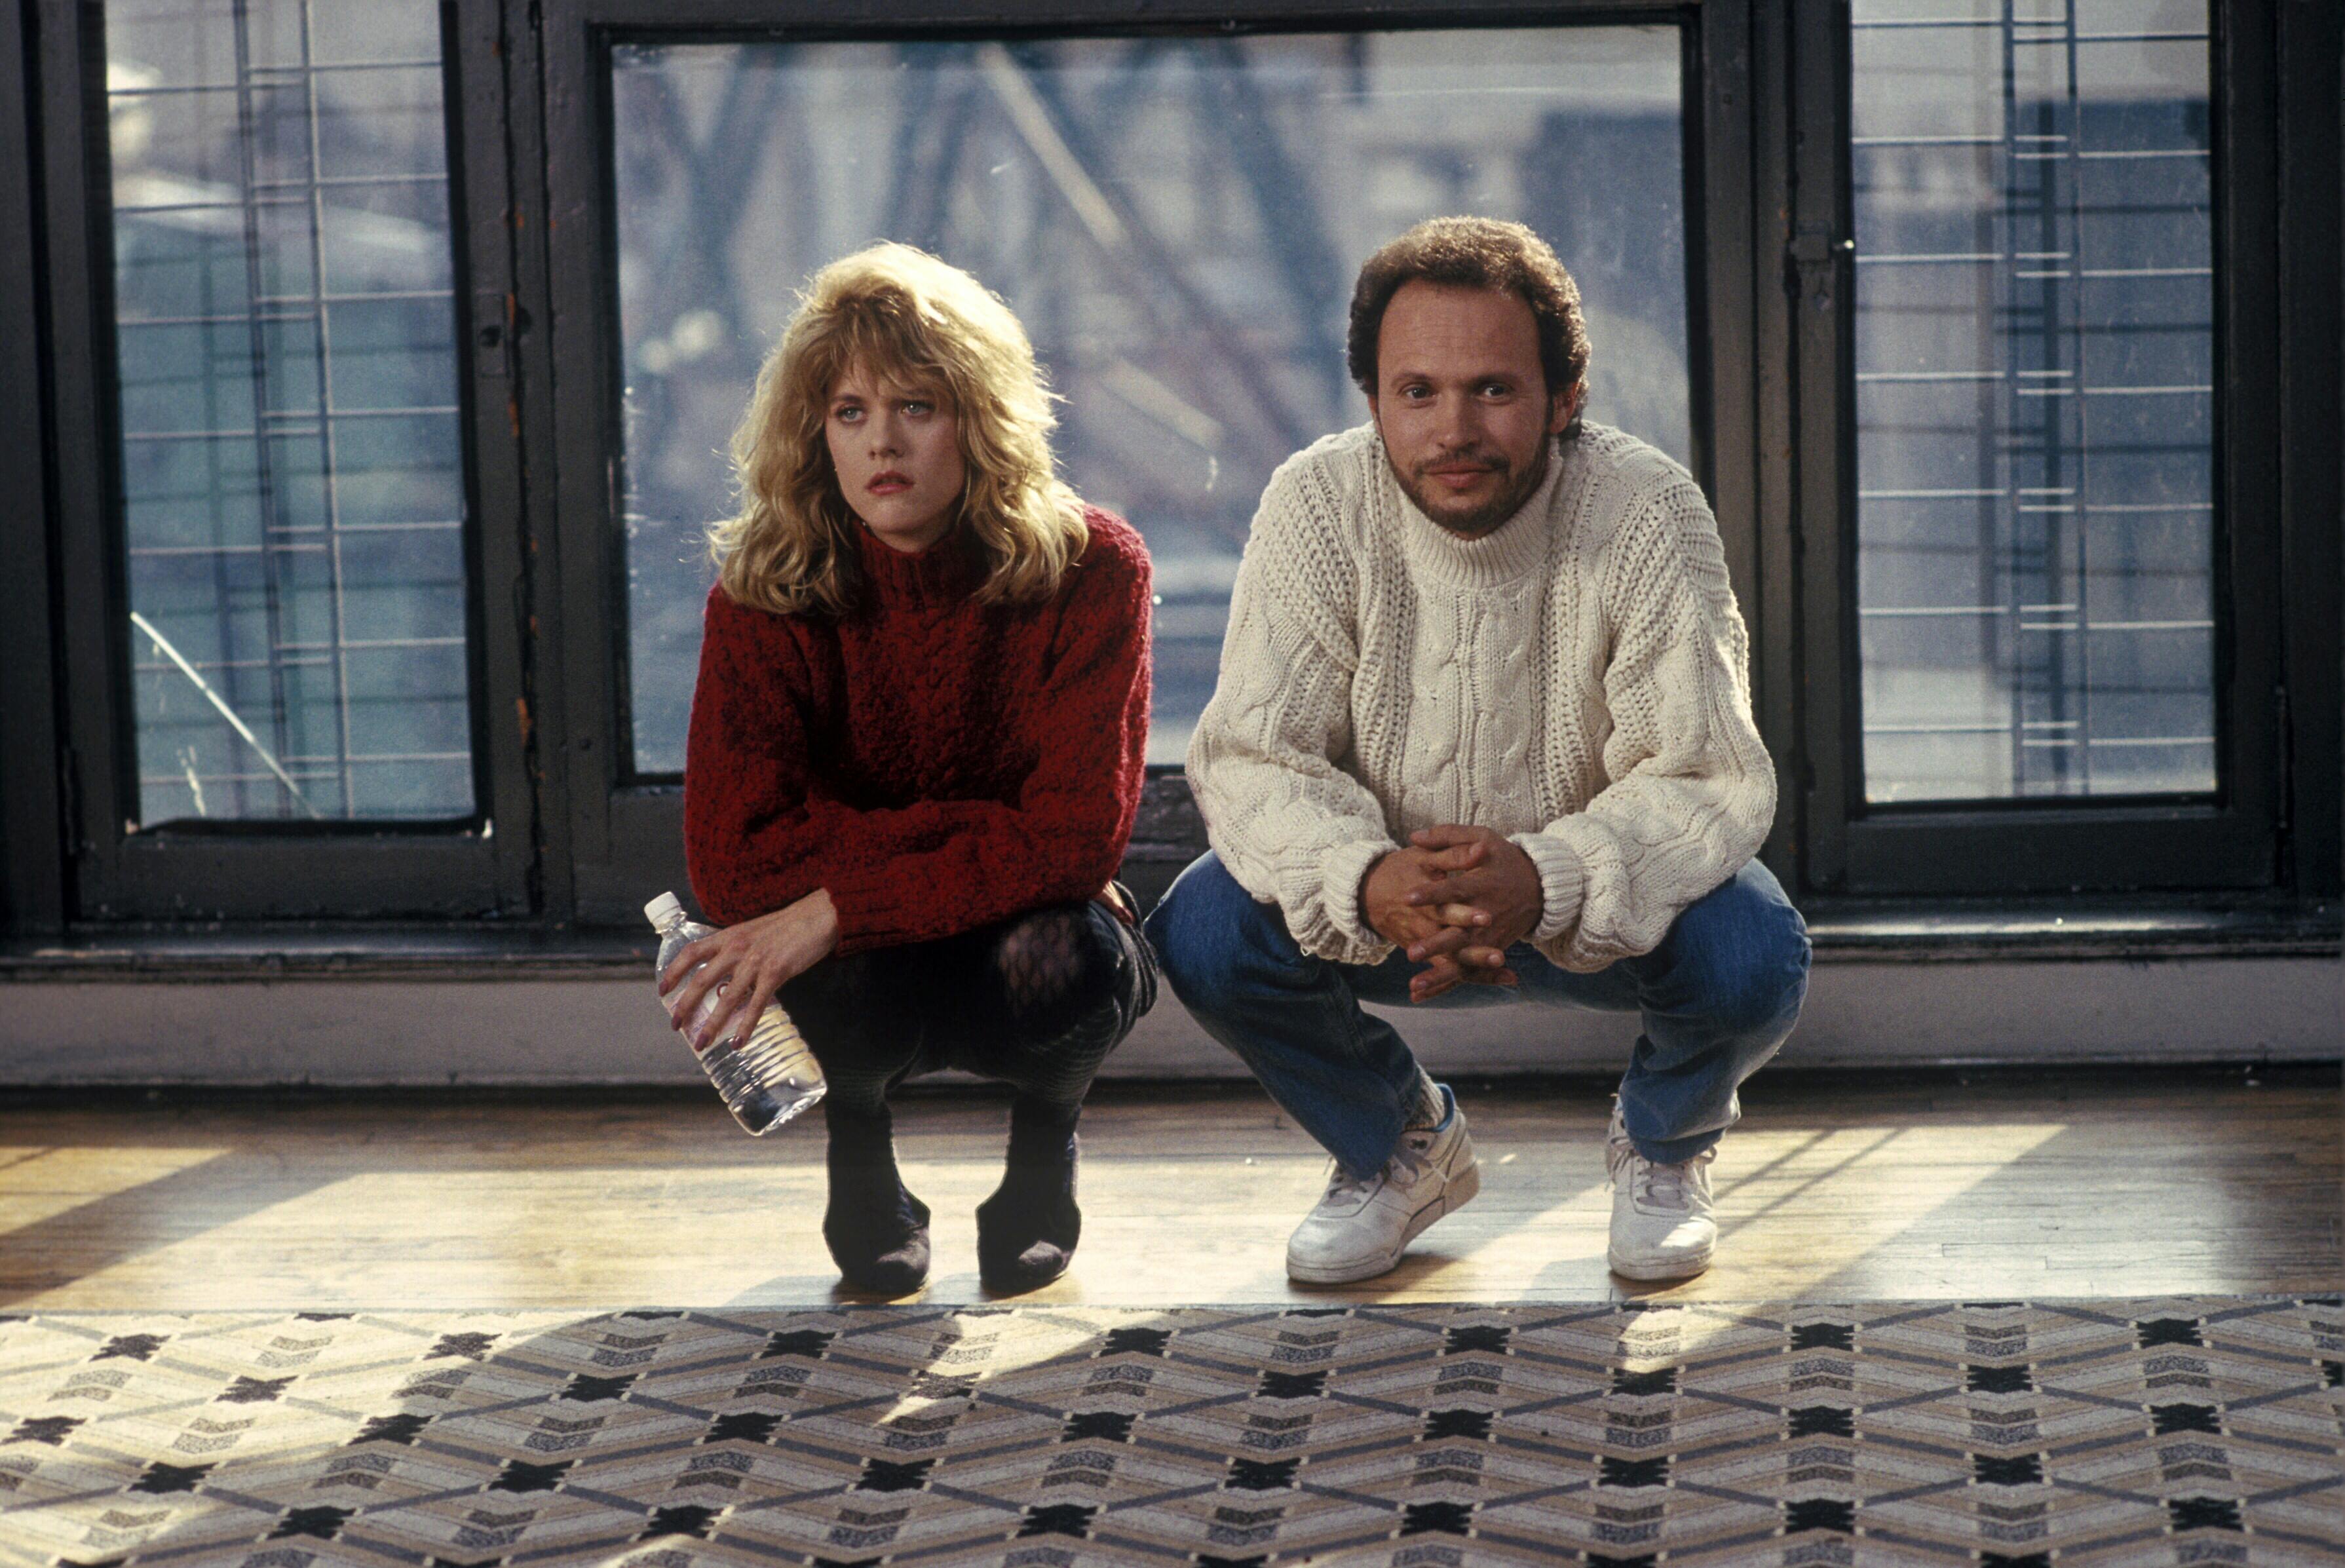 Meg Ryan & Billy Crystal  Characters: Sally Albright, Harry Burns Film: When Harry Met Sally... (USA 1989)  Director: Rob Reiner 12 July 1989     Date: 12 July 1989